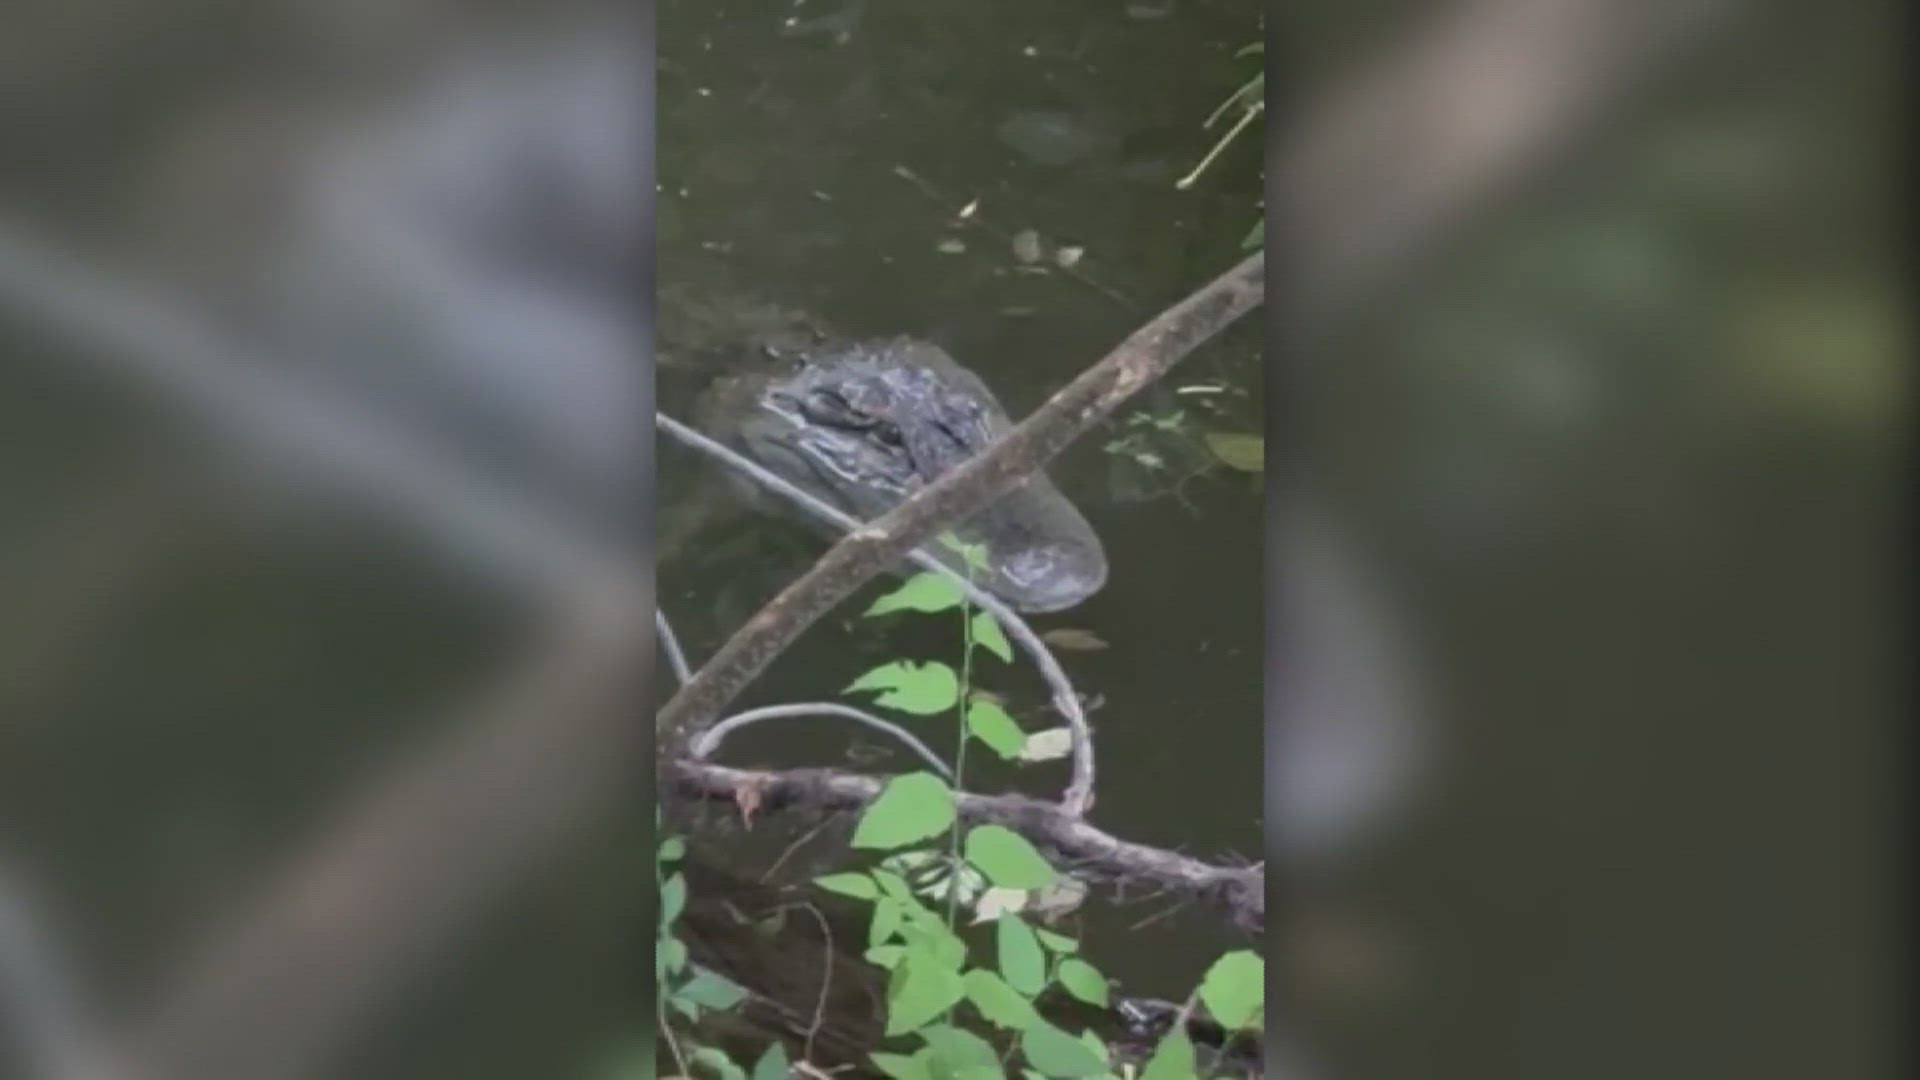 The gator was spotted in the northeast portion of Coppell, Texas. City officials are telling residents to not swim, fish or enter the water near Denton Creek.